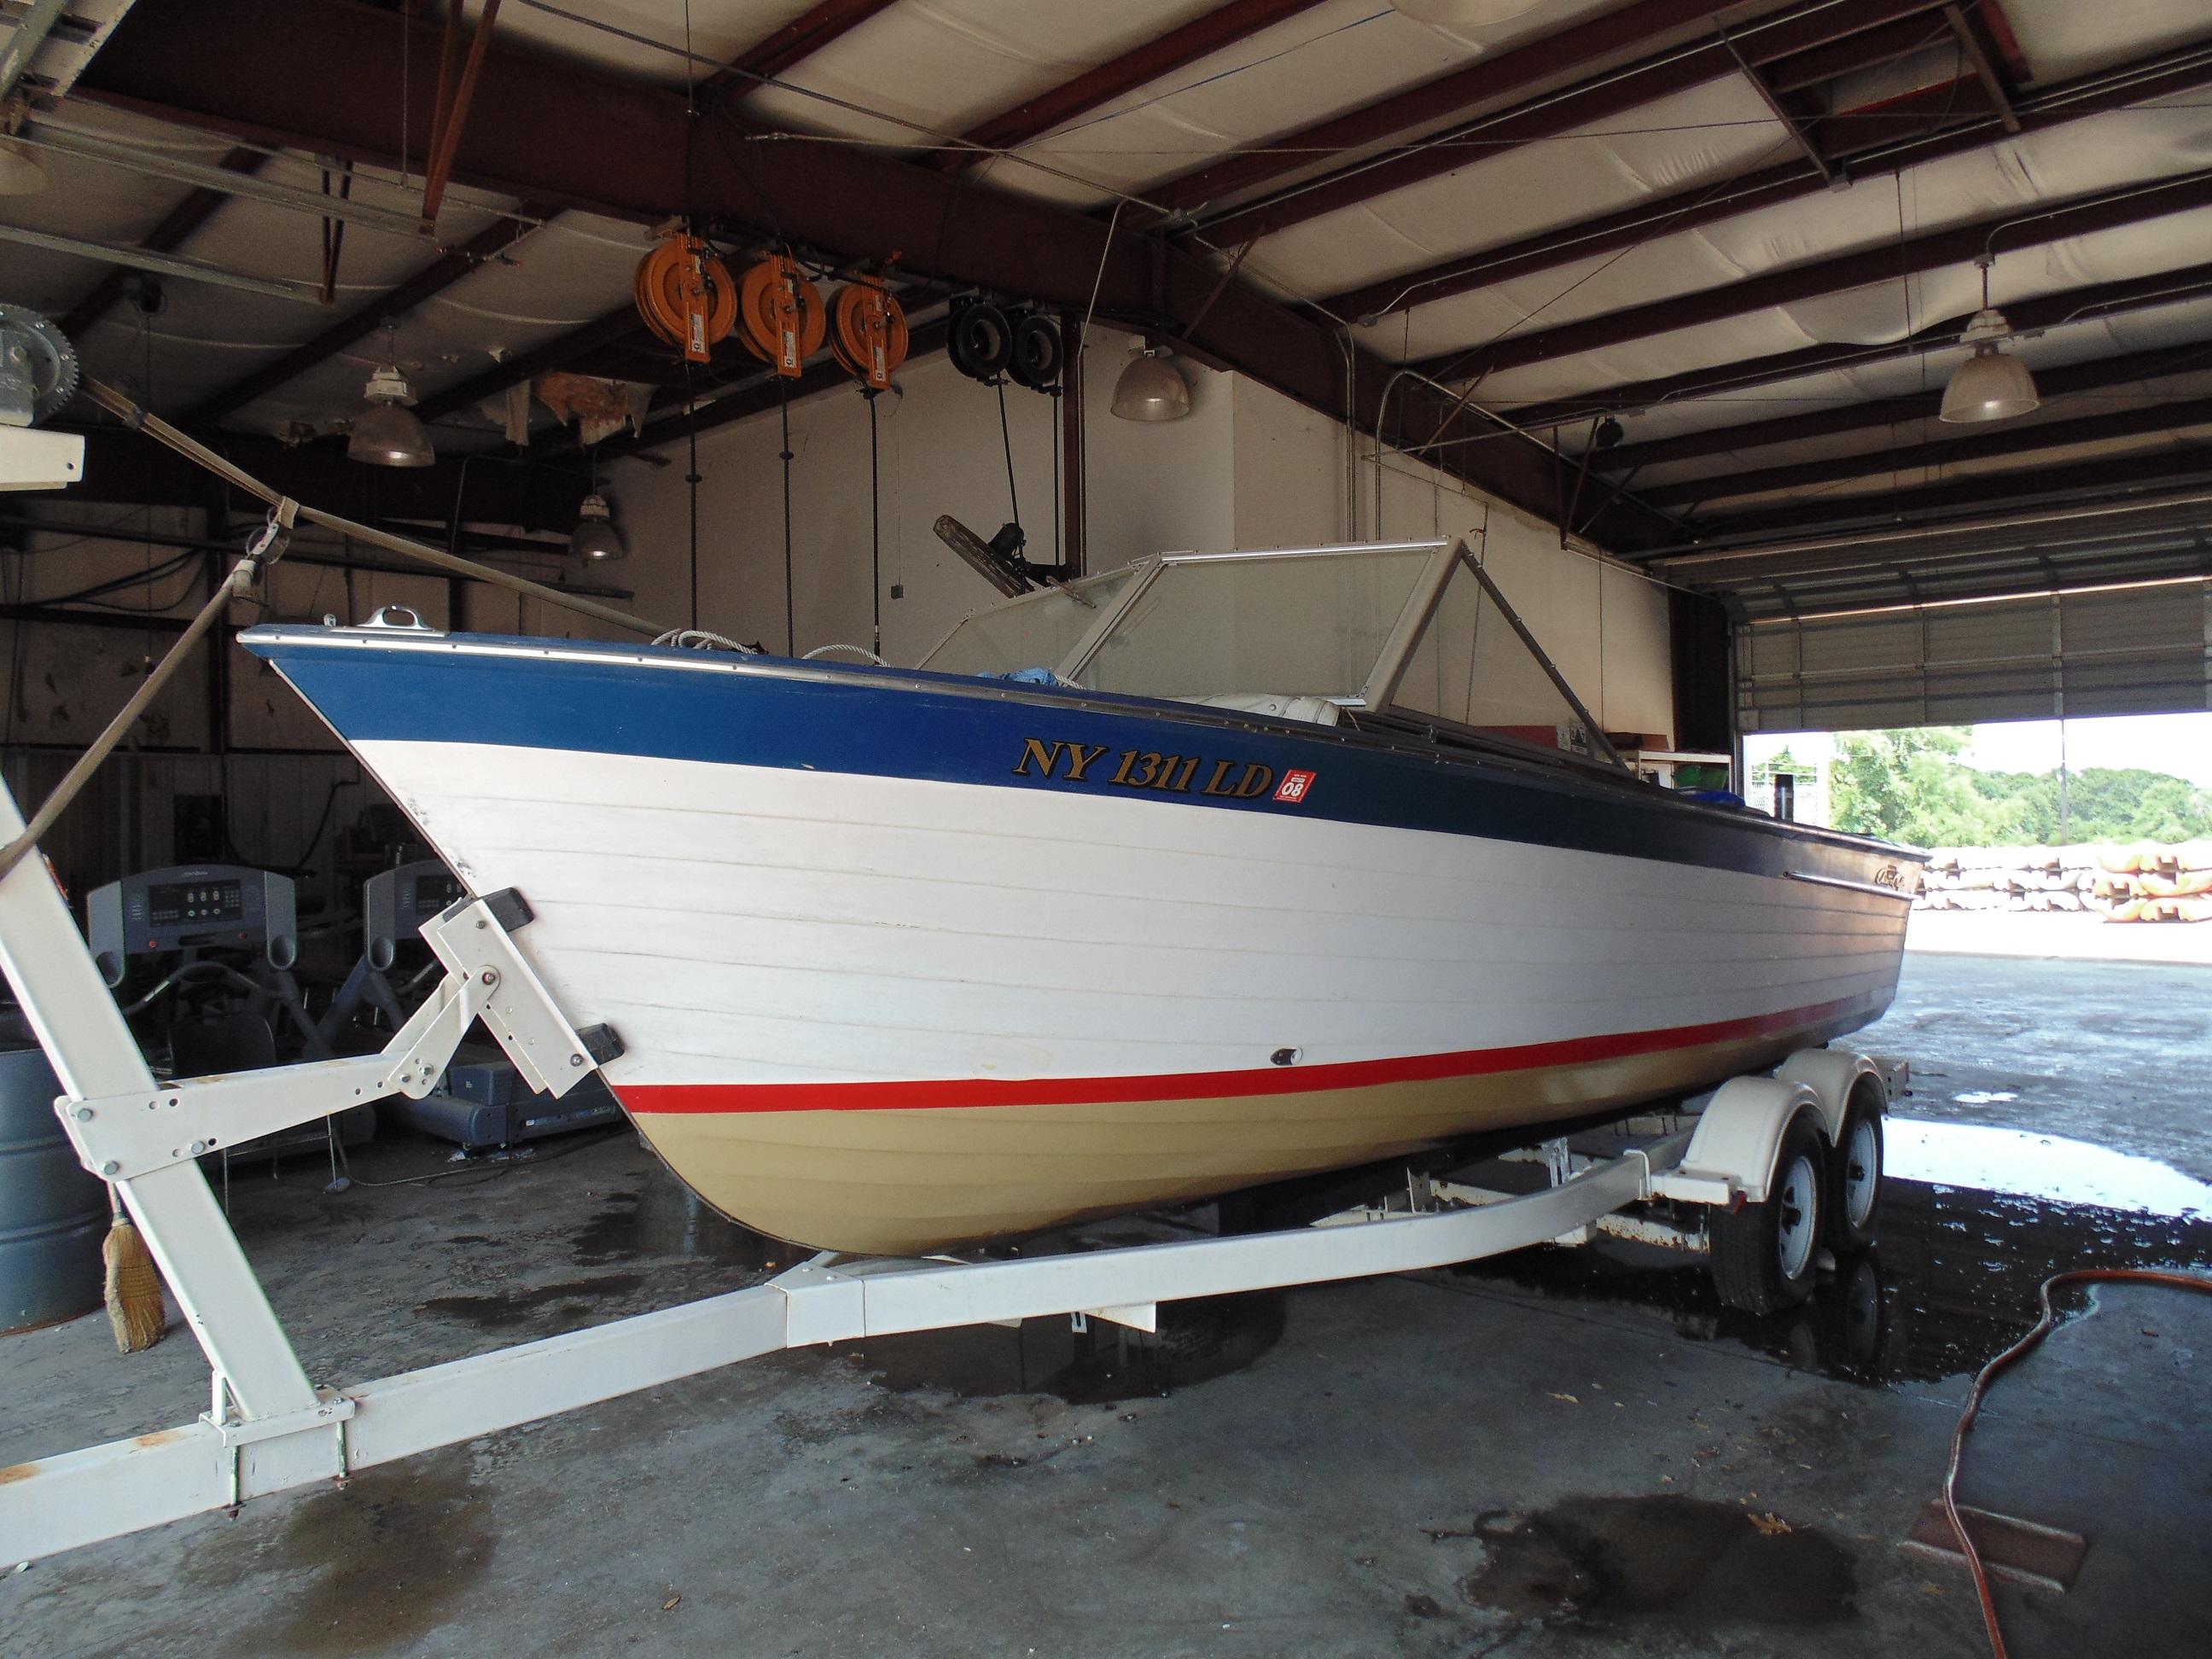 1966 Chris Craft Sea Skiff 22' Sportsman Boat, Located in Hempstead, Texas. Expected Hammer $25,000+